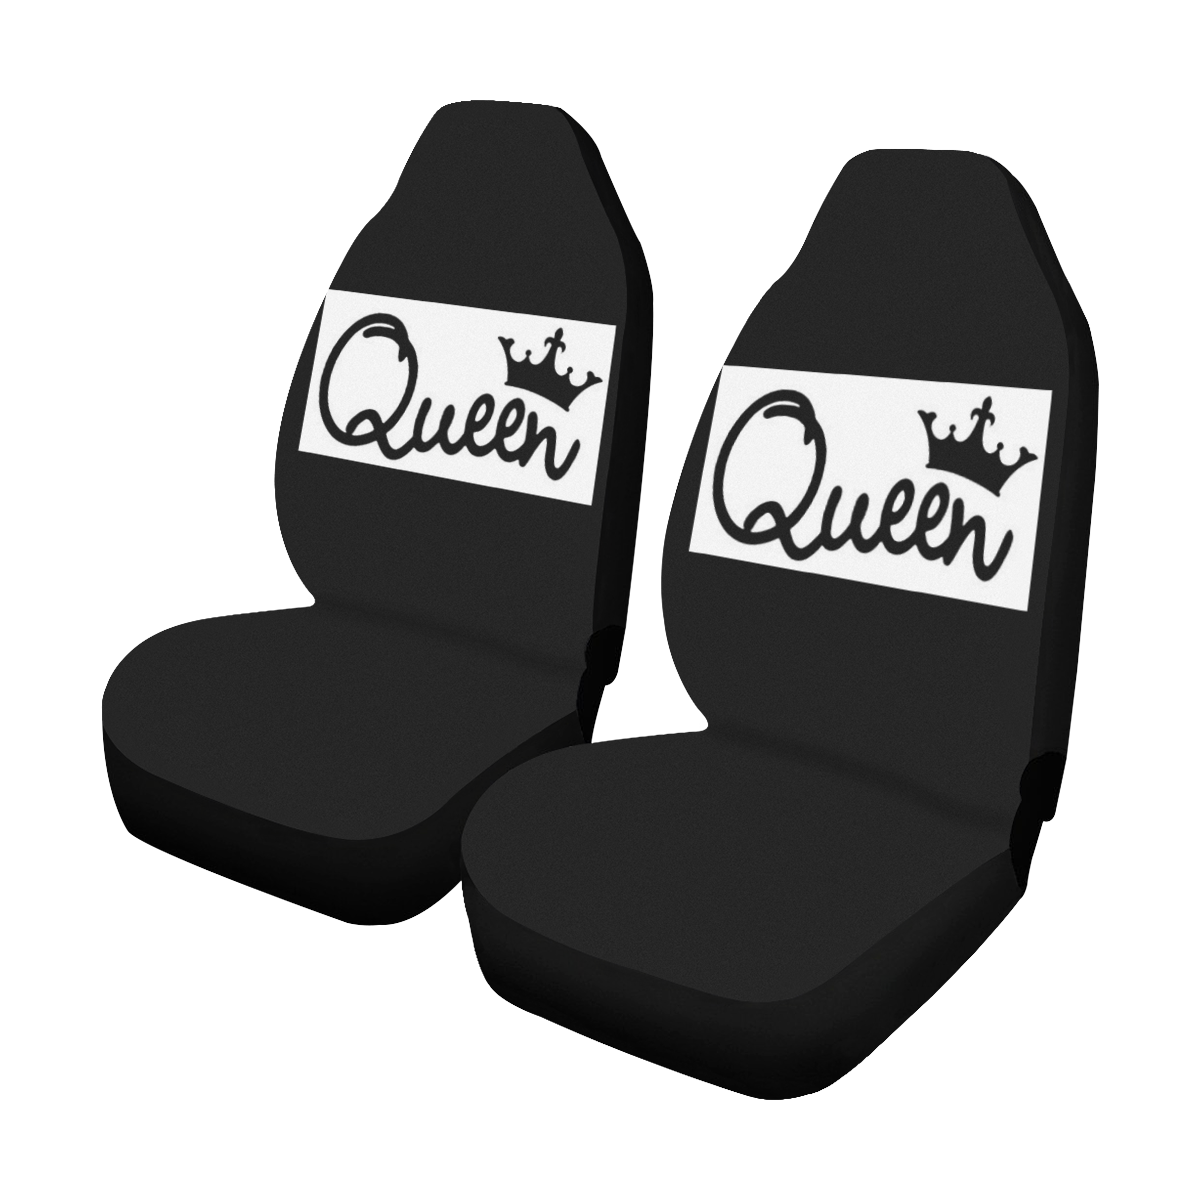 queen Car Seat Covers (Set of 2)